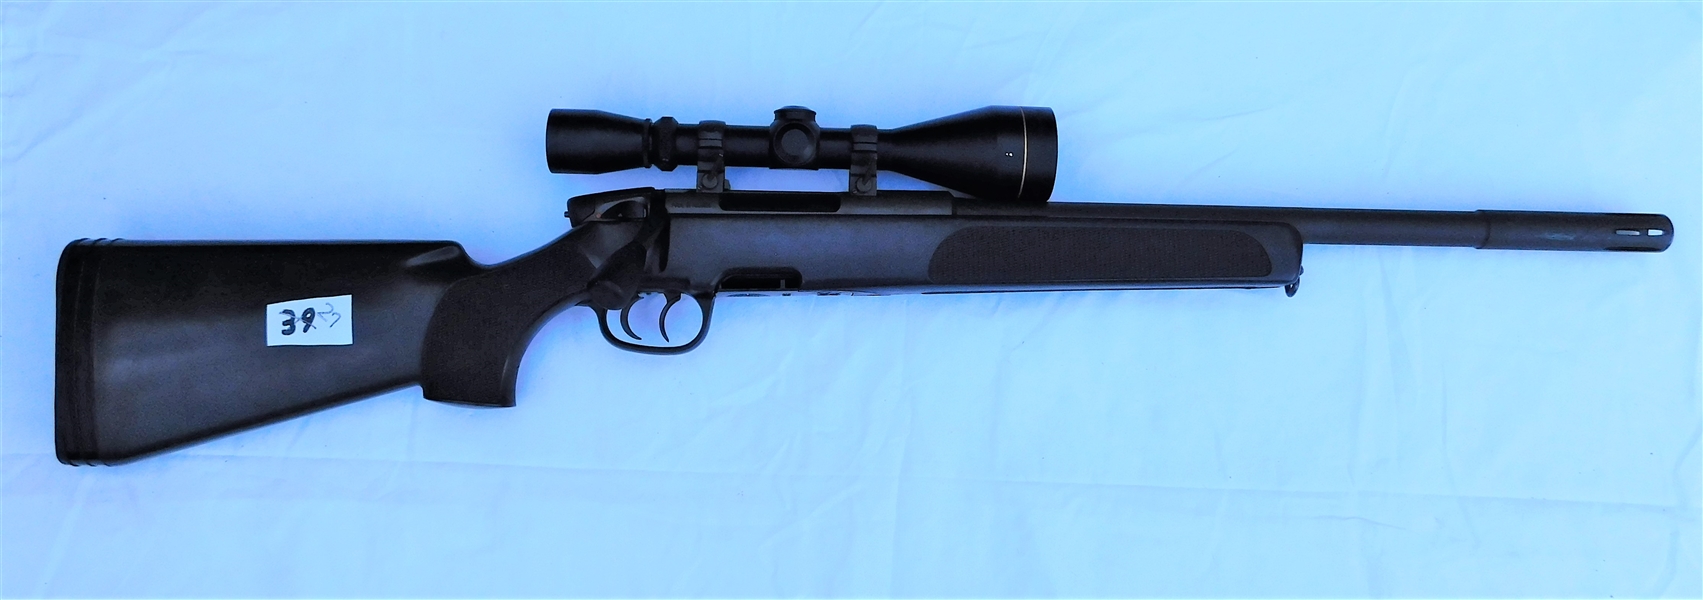 Steyr Mannlicher Bolt Action Rifle Made in Austria, .308 Win Caliber - with New Leupold Vari-XIIc 3x9 - 50mm Scope  - Clip is Broken -Double Trigger